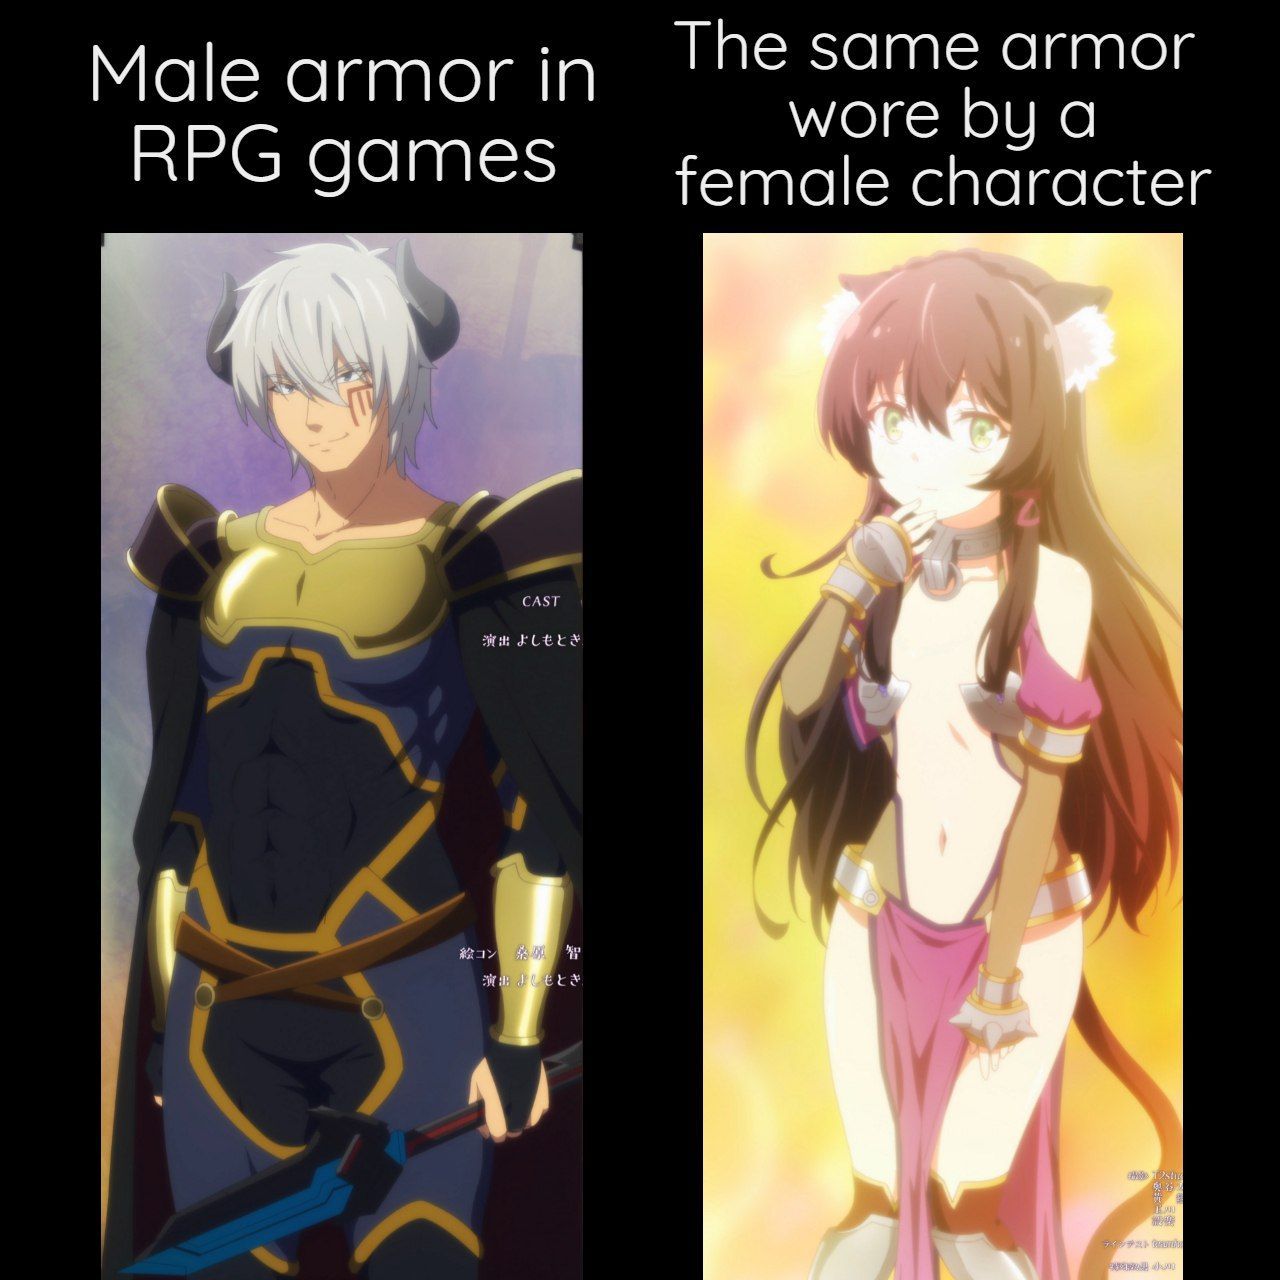 Level 99 female armor : Bras and Panties with a "little" taste of fan service